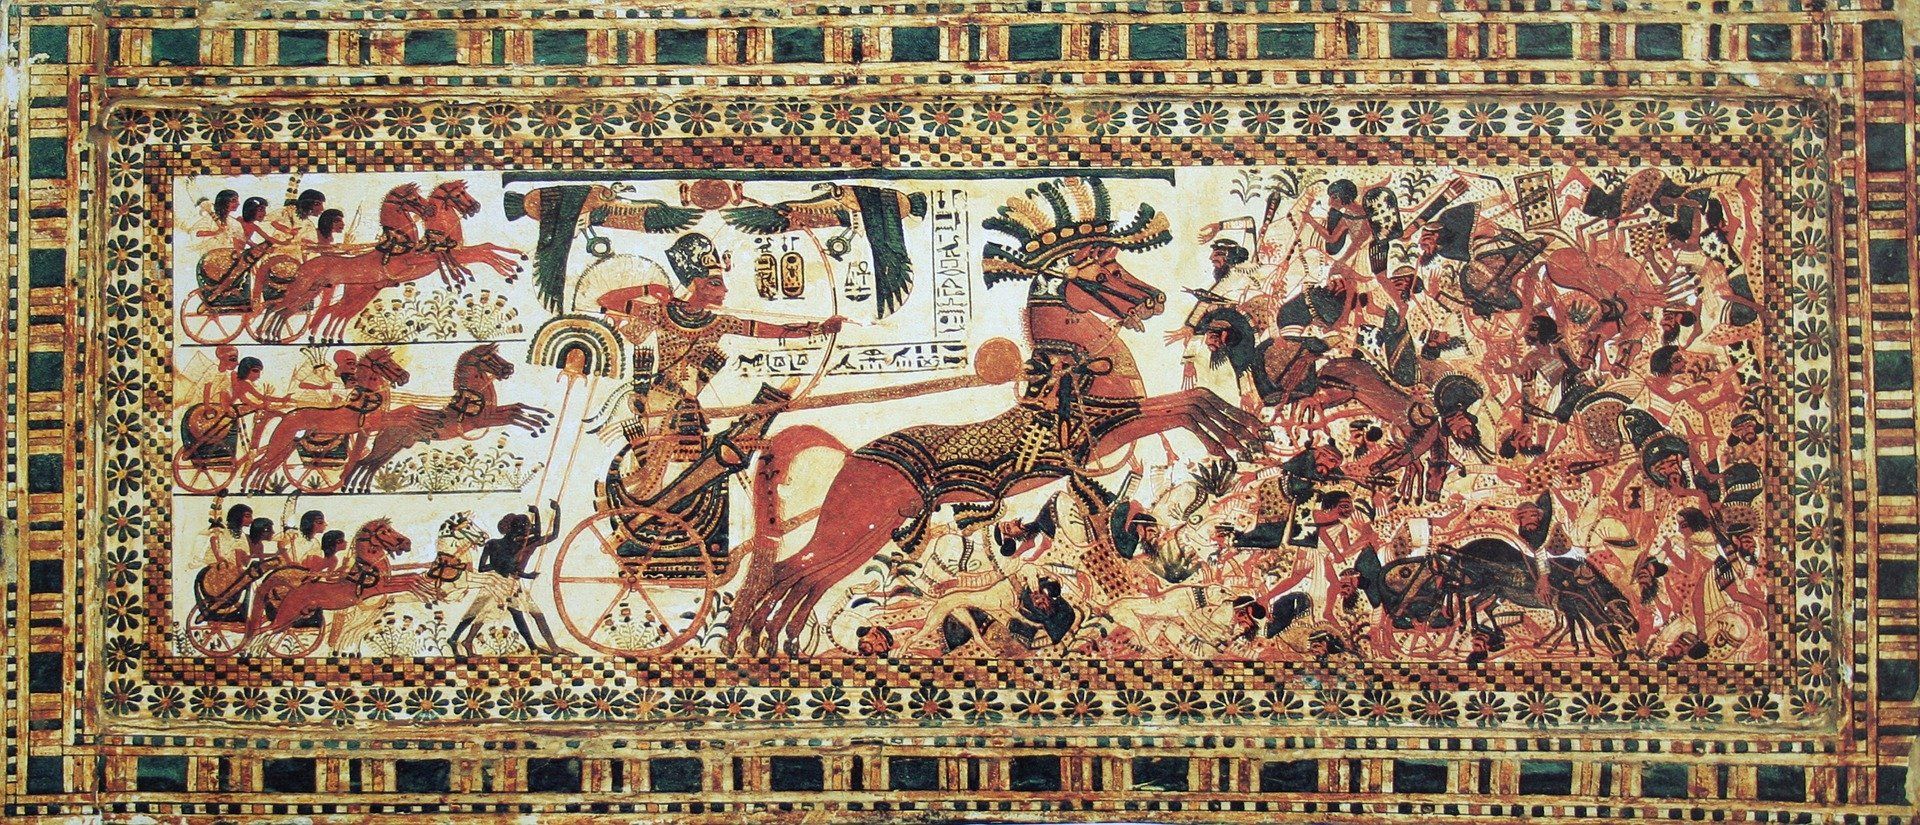 War in Ancient Egypt